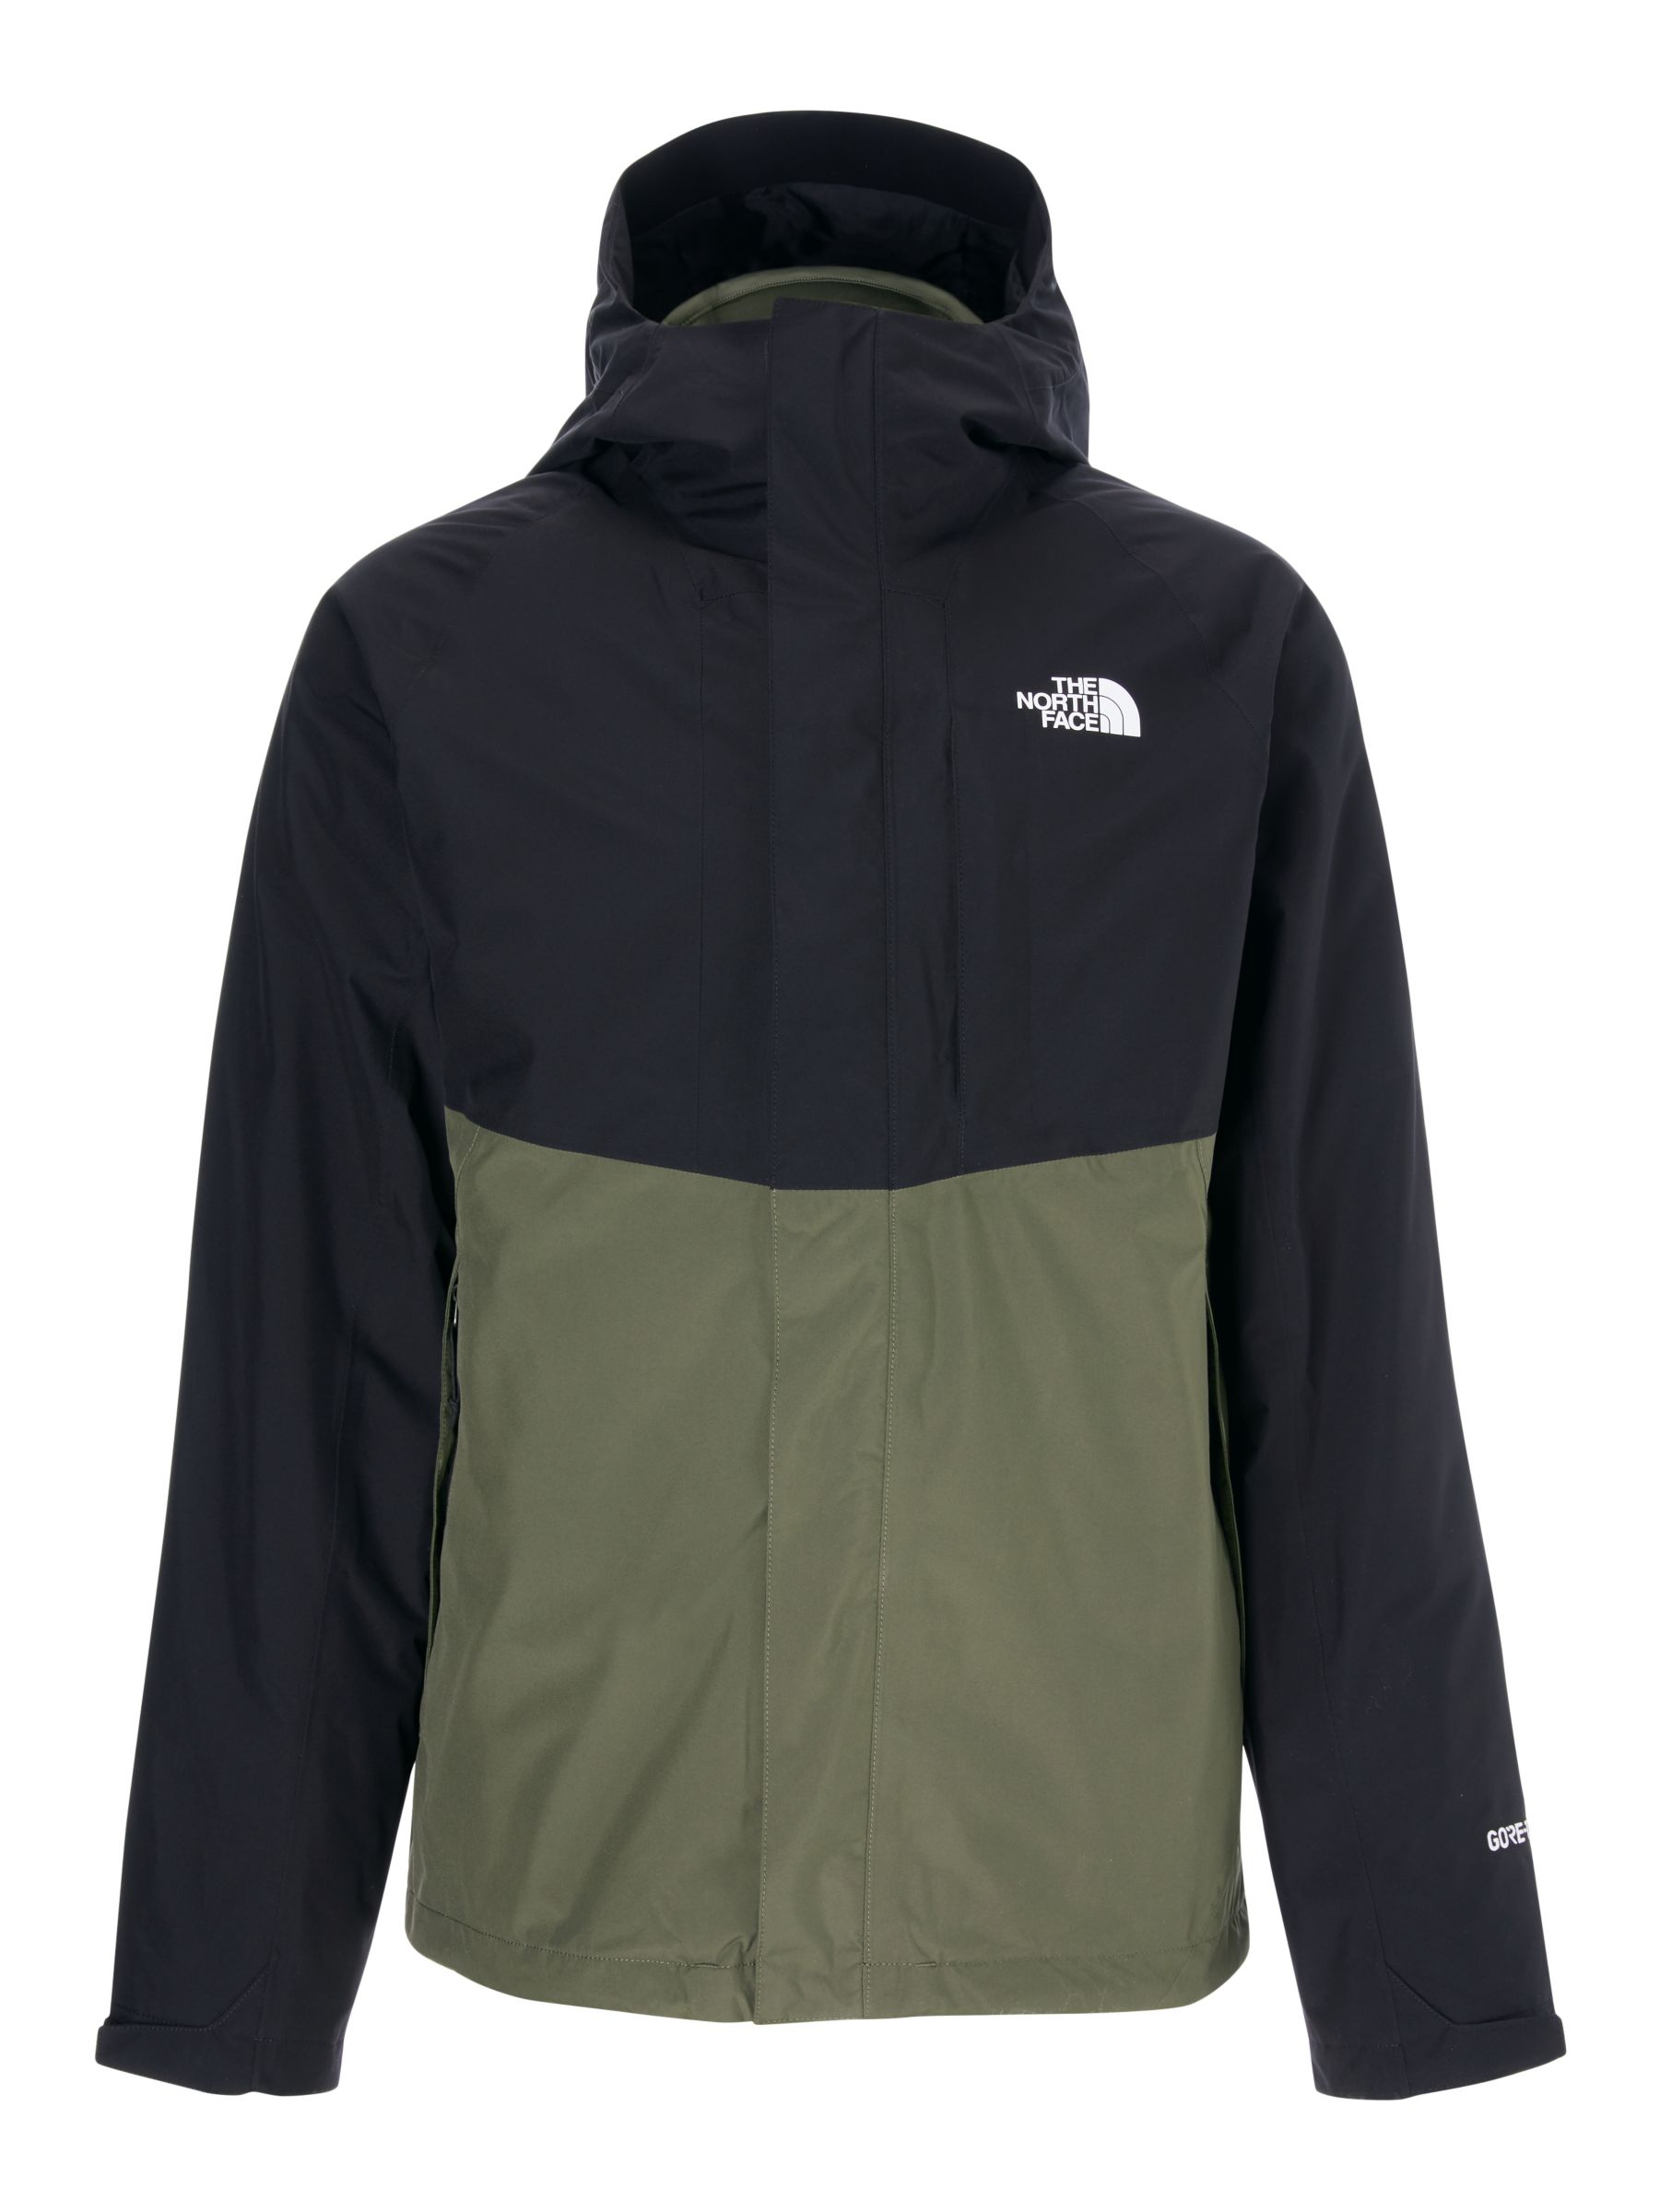 The North Face Mountain Light Triclimate Men's Waterproof Gore-Tex Jacket